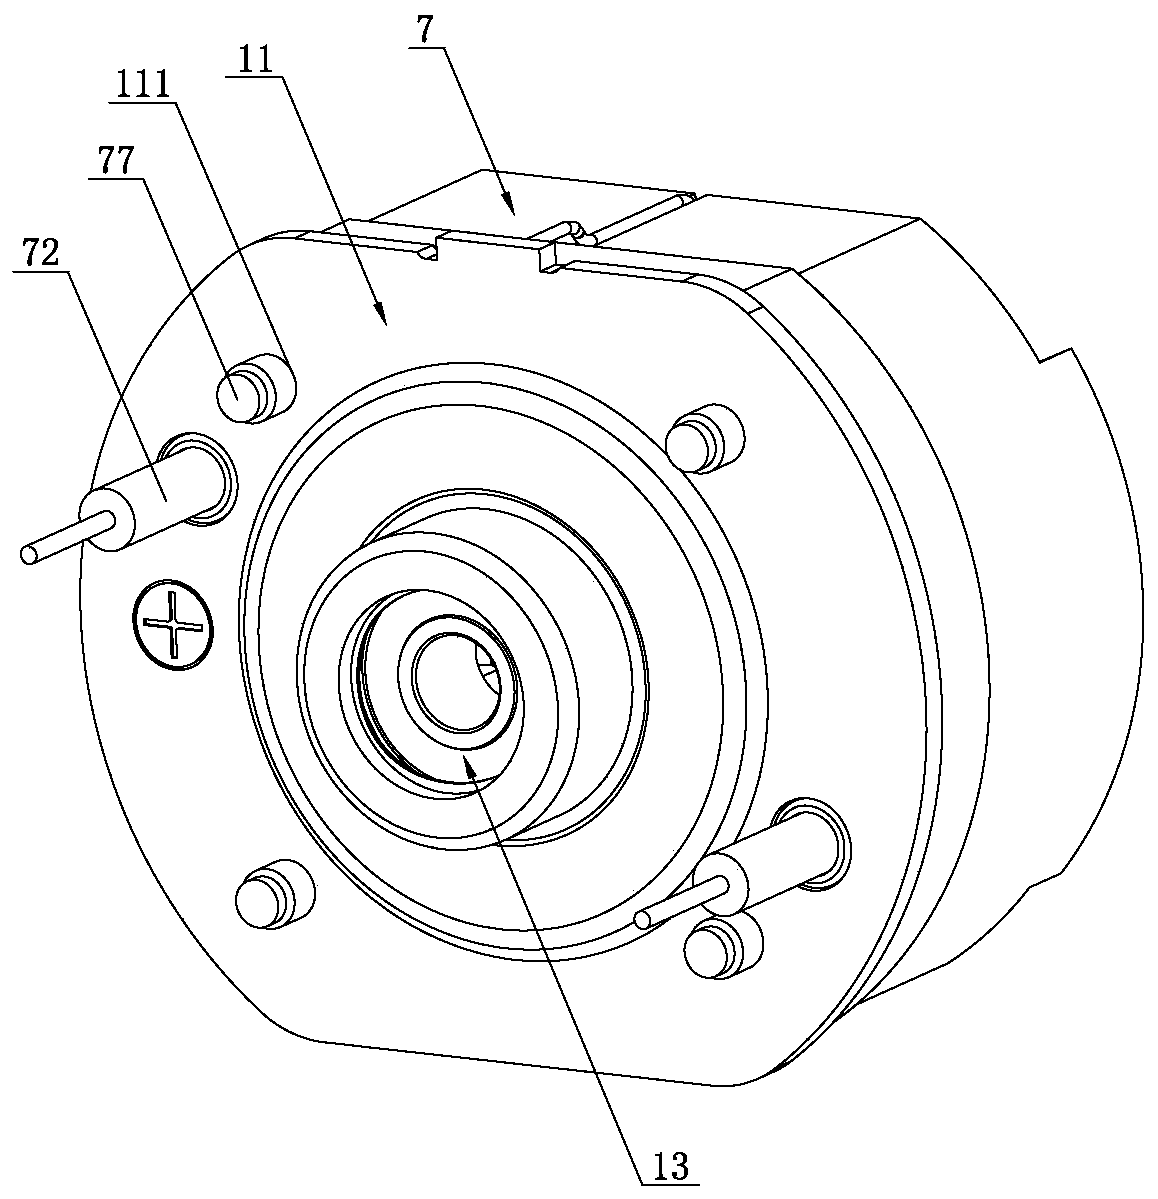 Mute motor structure convenient to install